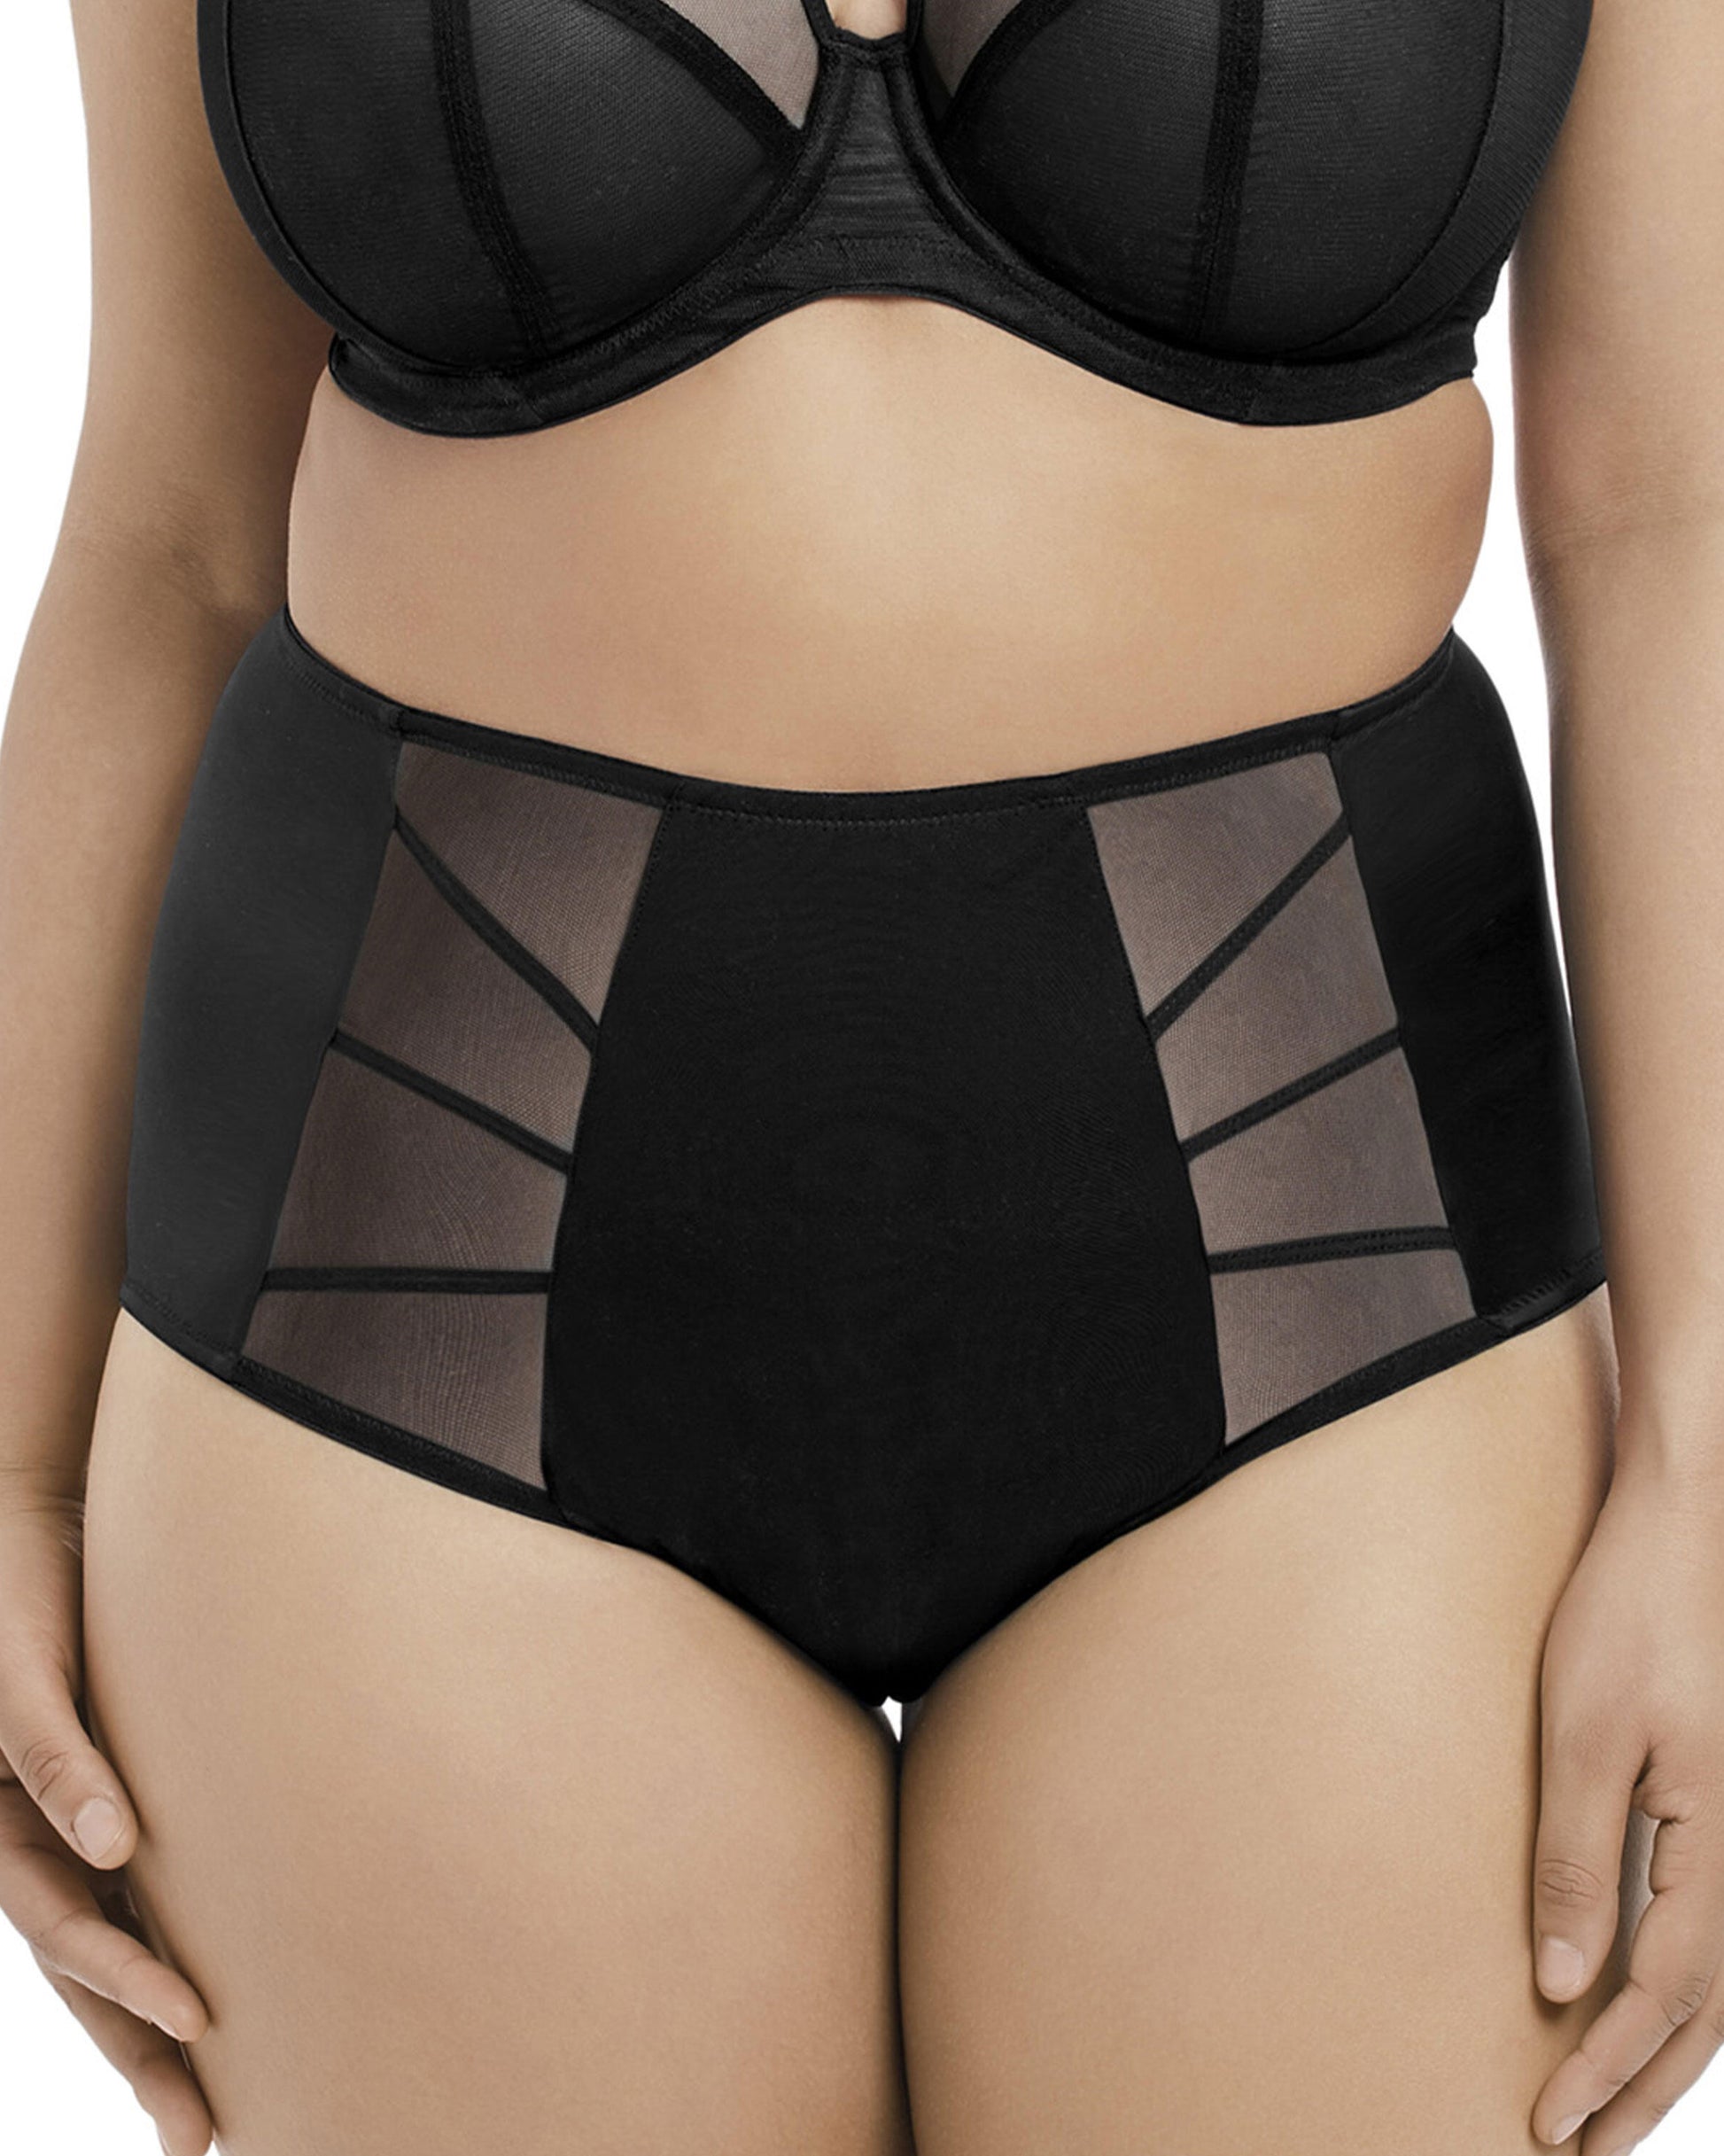 Model wearing a high waist full brief panty with mesh inserts in black